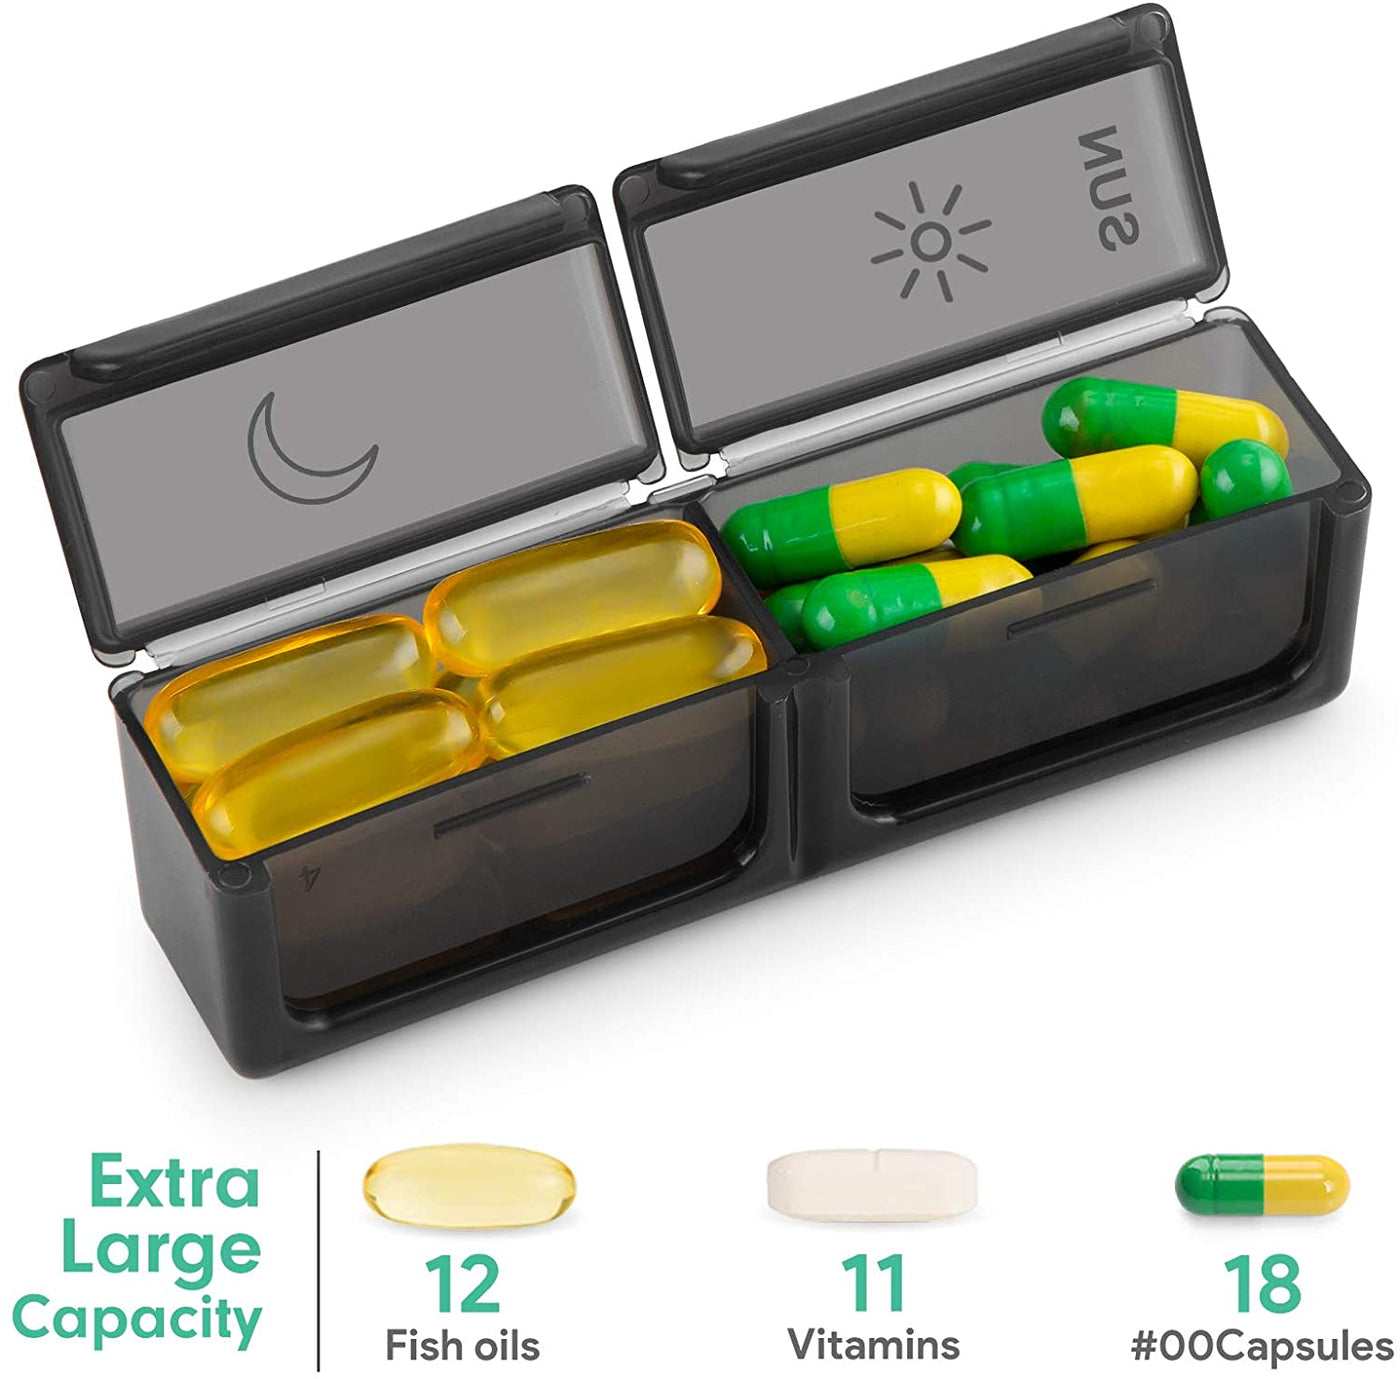 Pill Organizer 2 Times a Day, BUG HULL Large Weekly Pill Case AM PM 7 Day Pill Box Day and Night Pill Holder Container for Vitamins, Fish Oils, Supplements